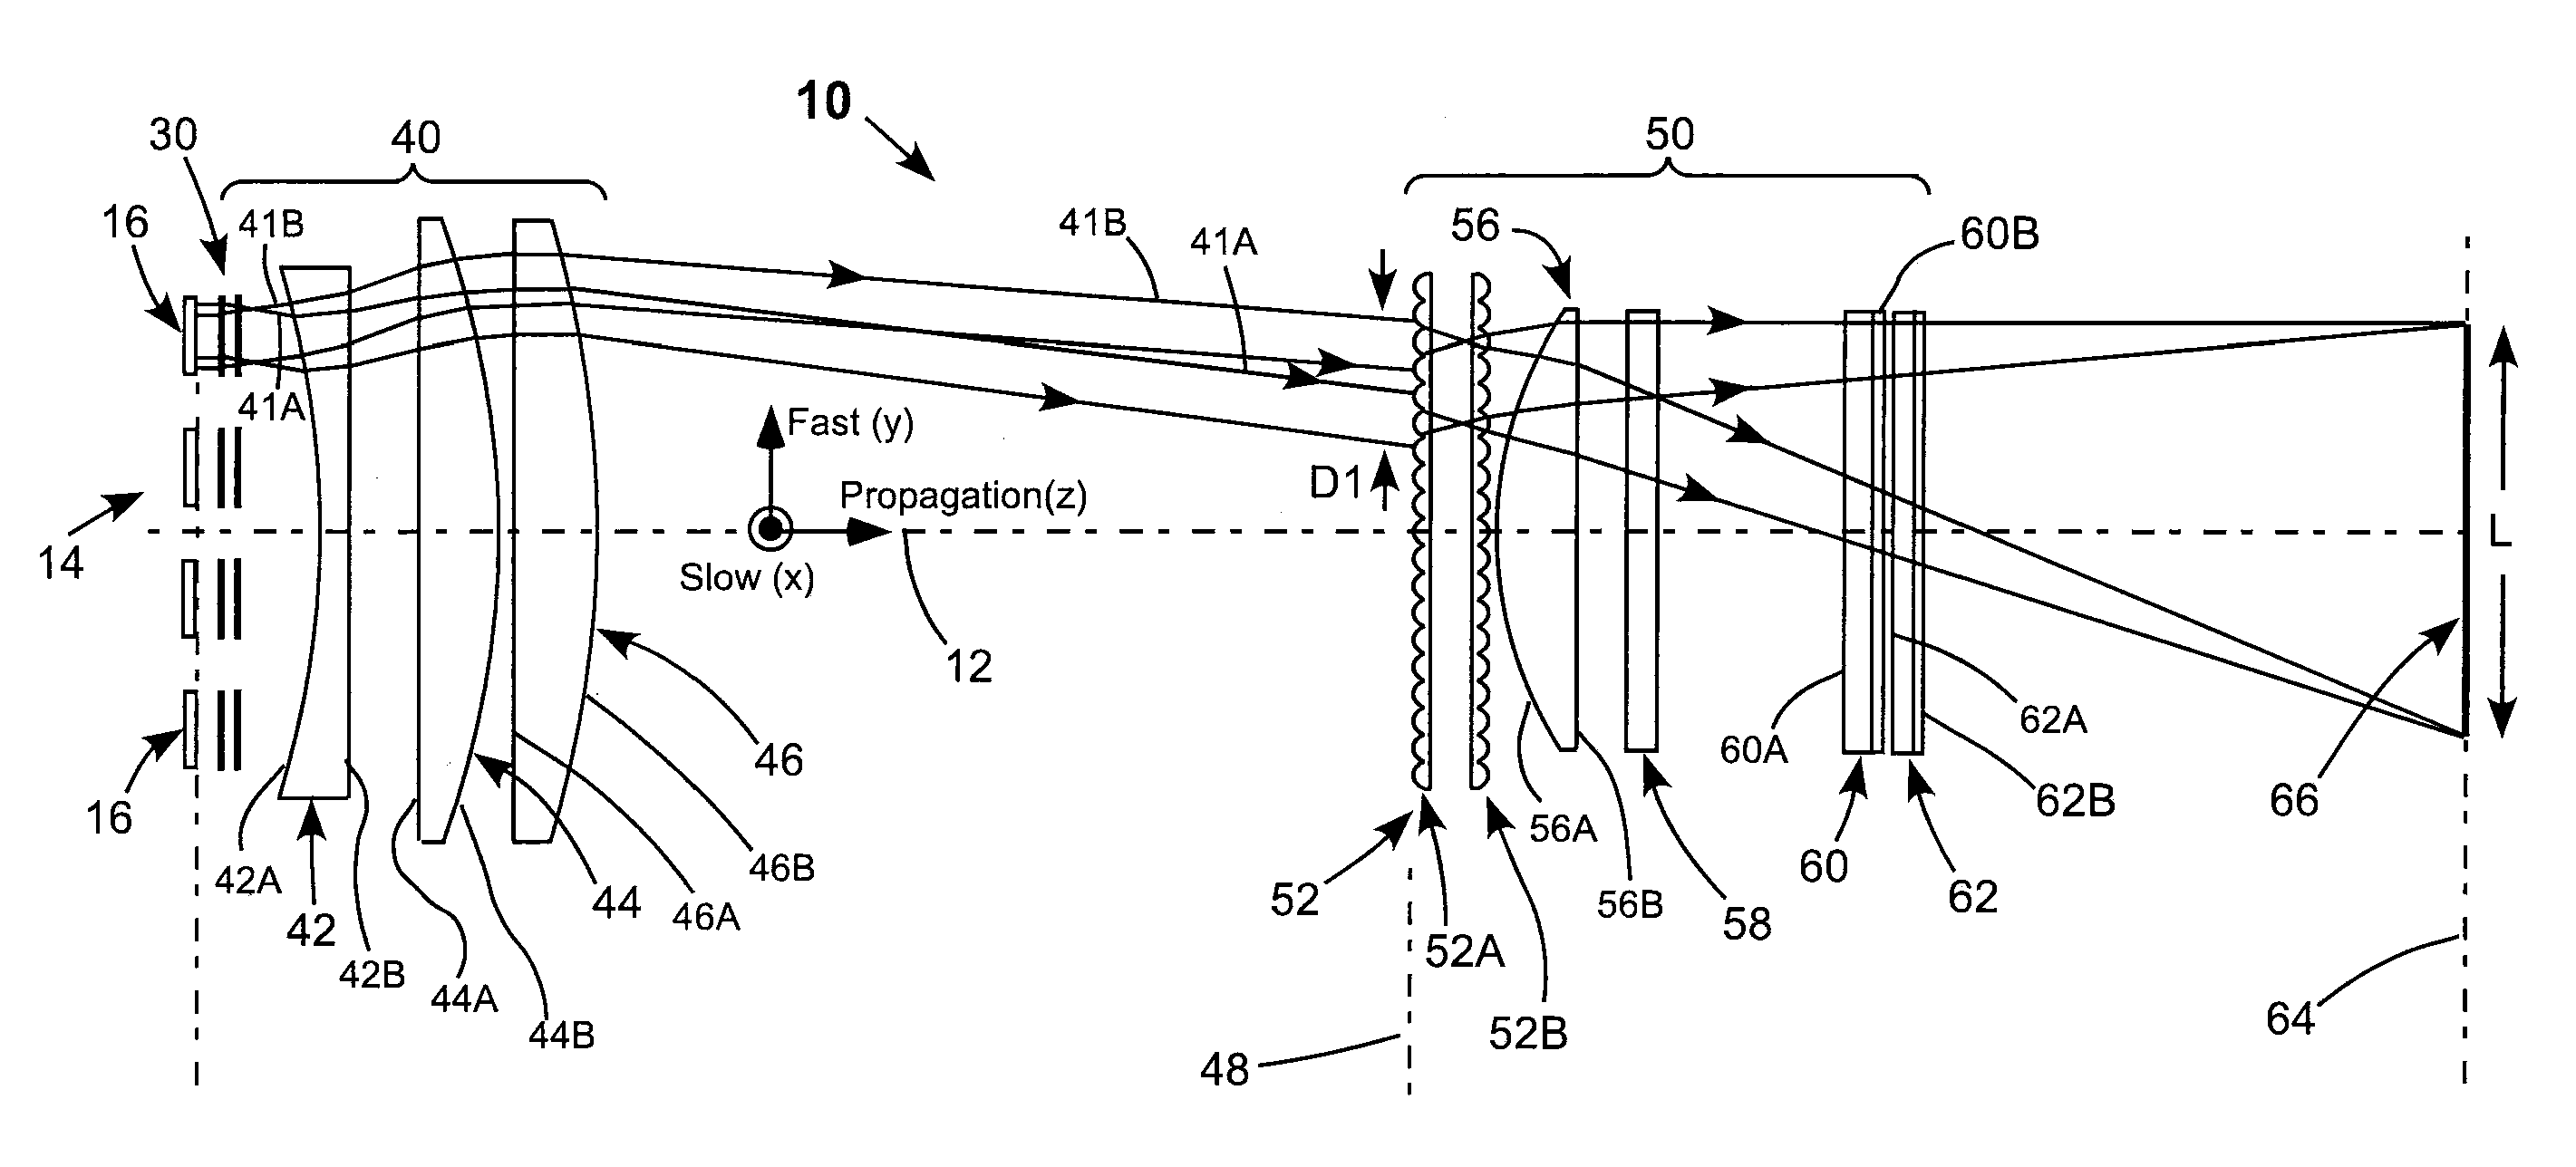 Line-projection apparatus for arrays of diode-laser bar stacks